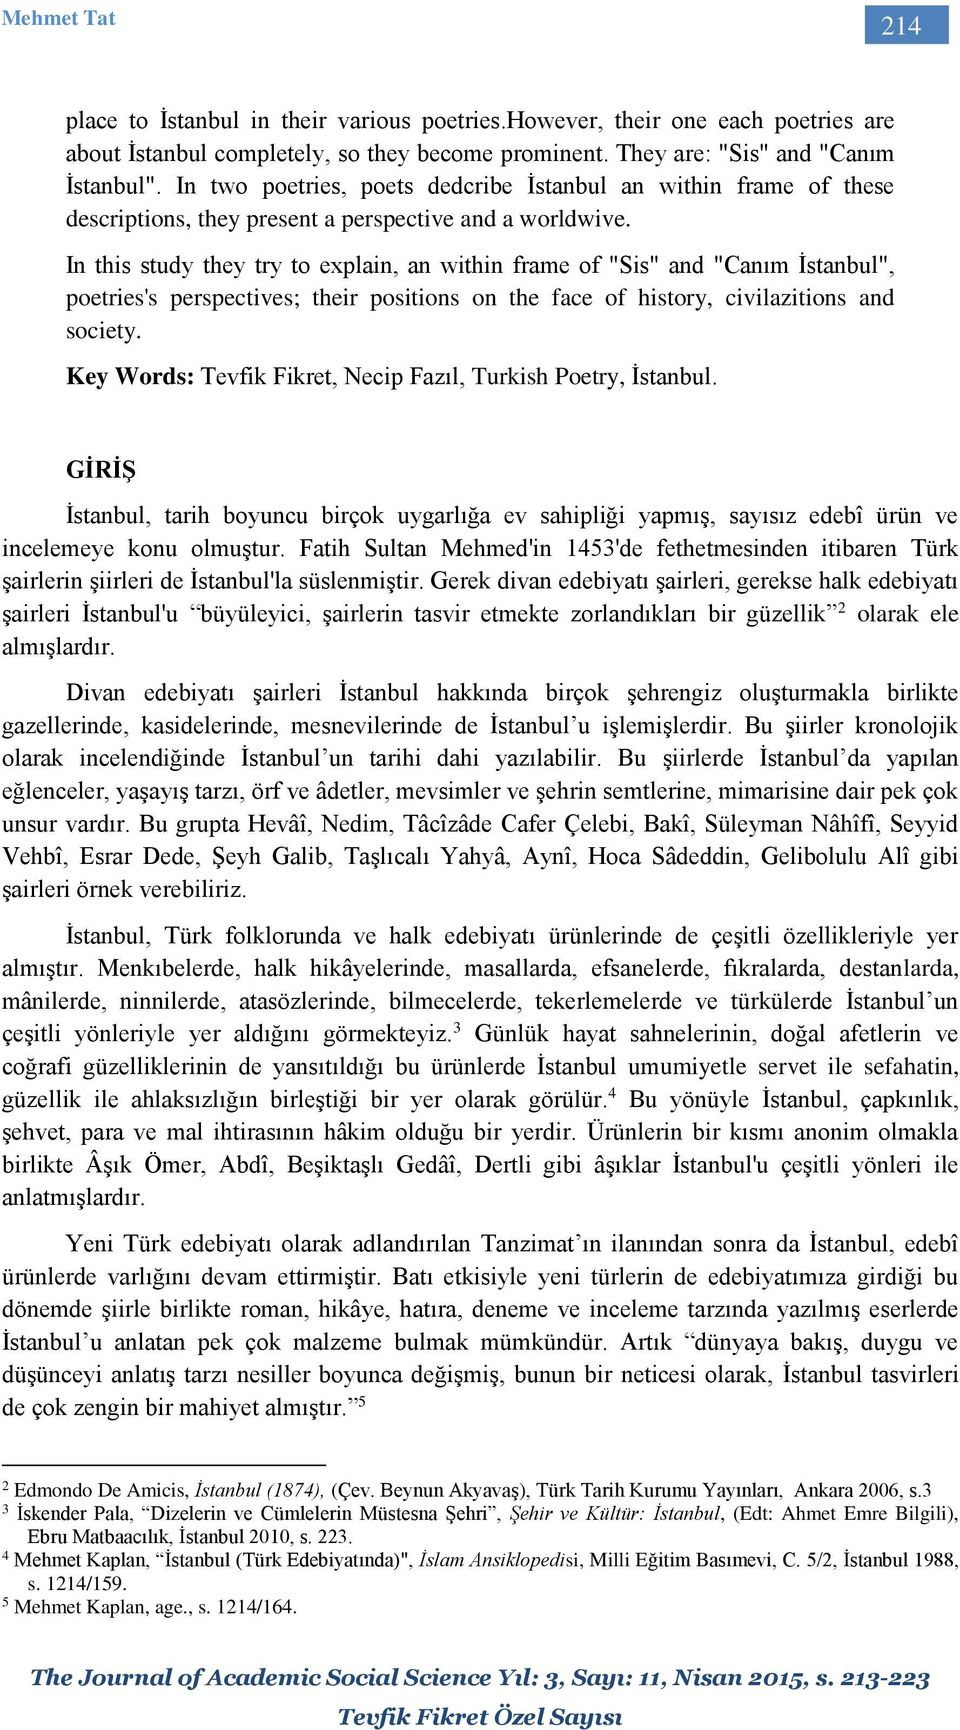 In this study they try to explain, an within frame of "Sis" and "Canım İstanbul", poetries's perspectives; their positions on the face of history, civilazitions and society.